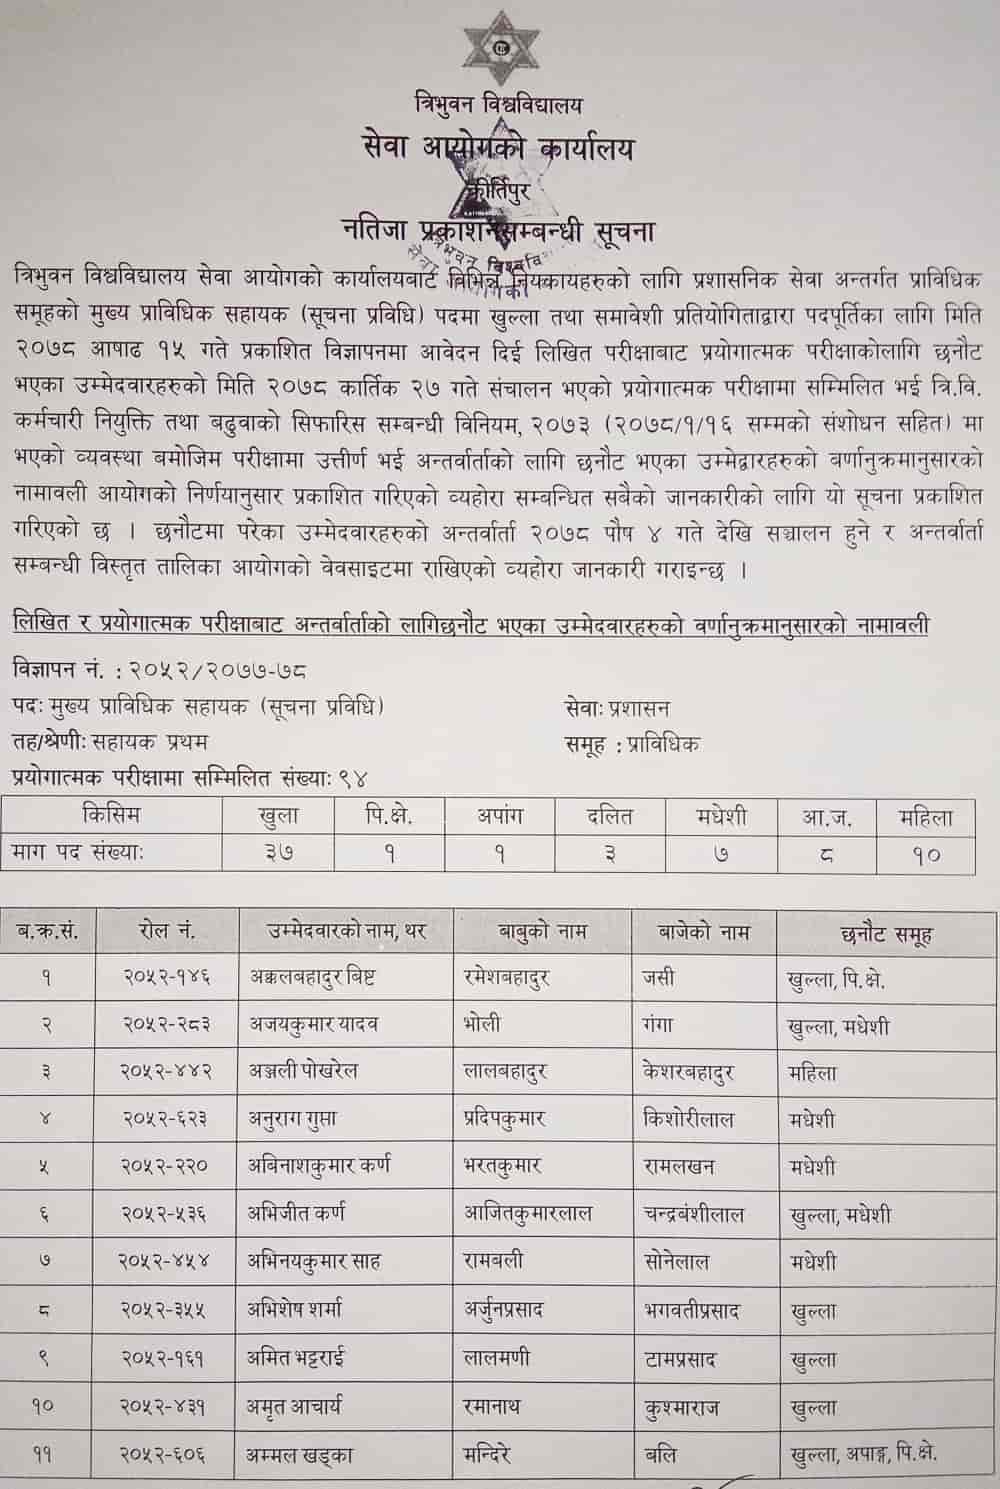 Tribhuvan University Service Commission (TUSC) Written Exam Result of Various Positions